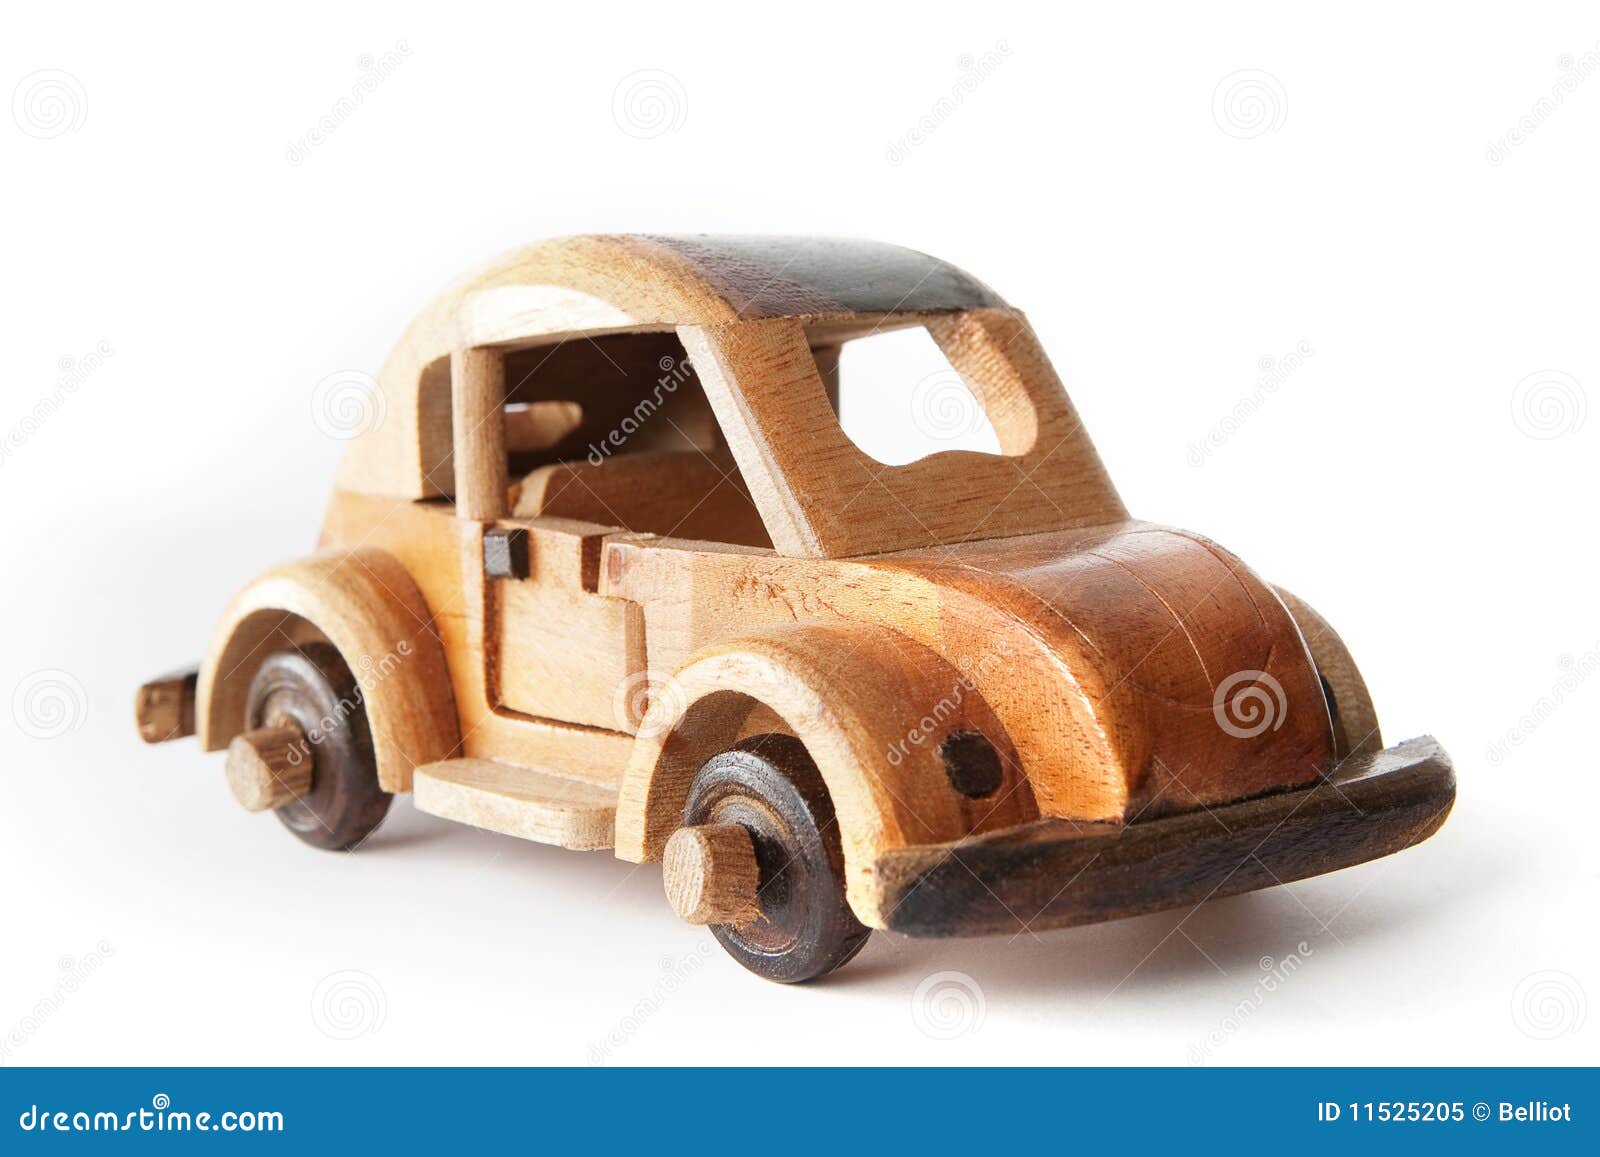 Details about   Handmade Wooden Toy Car 